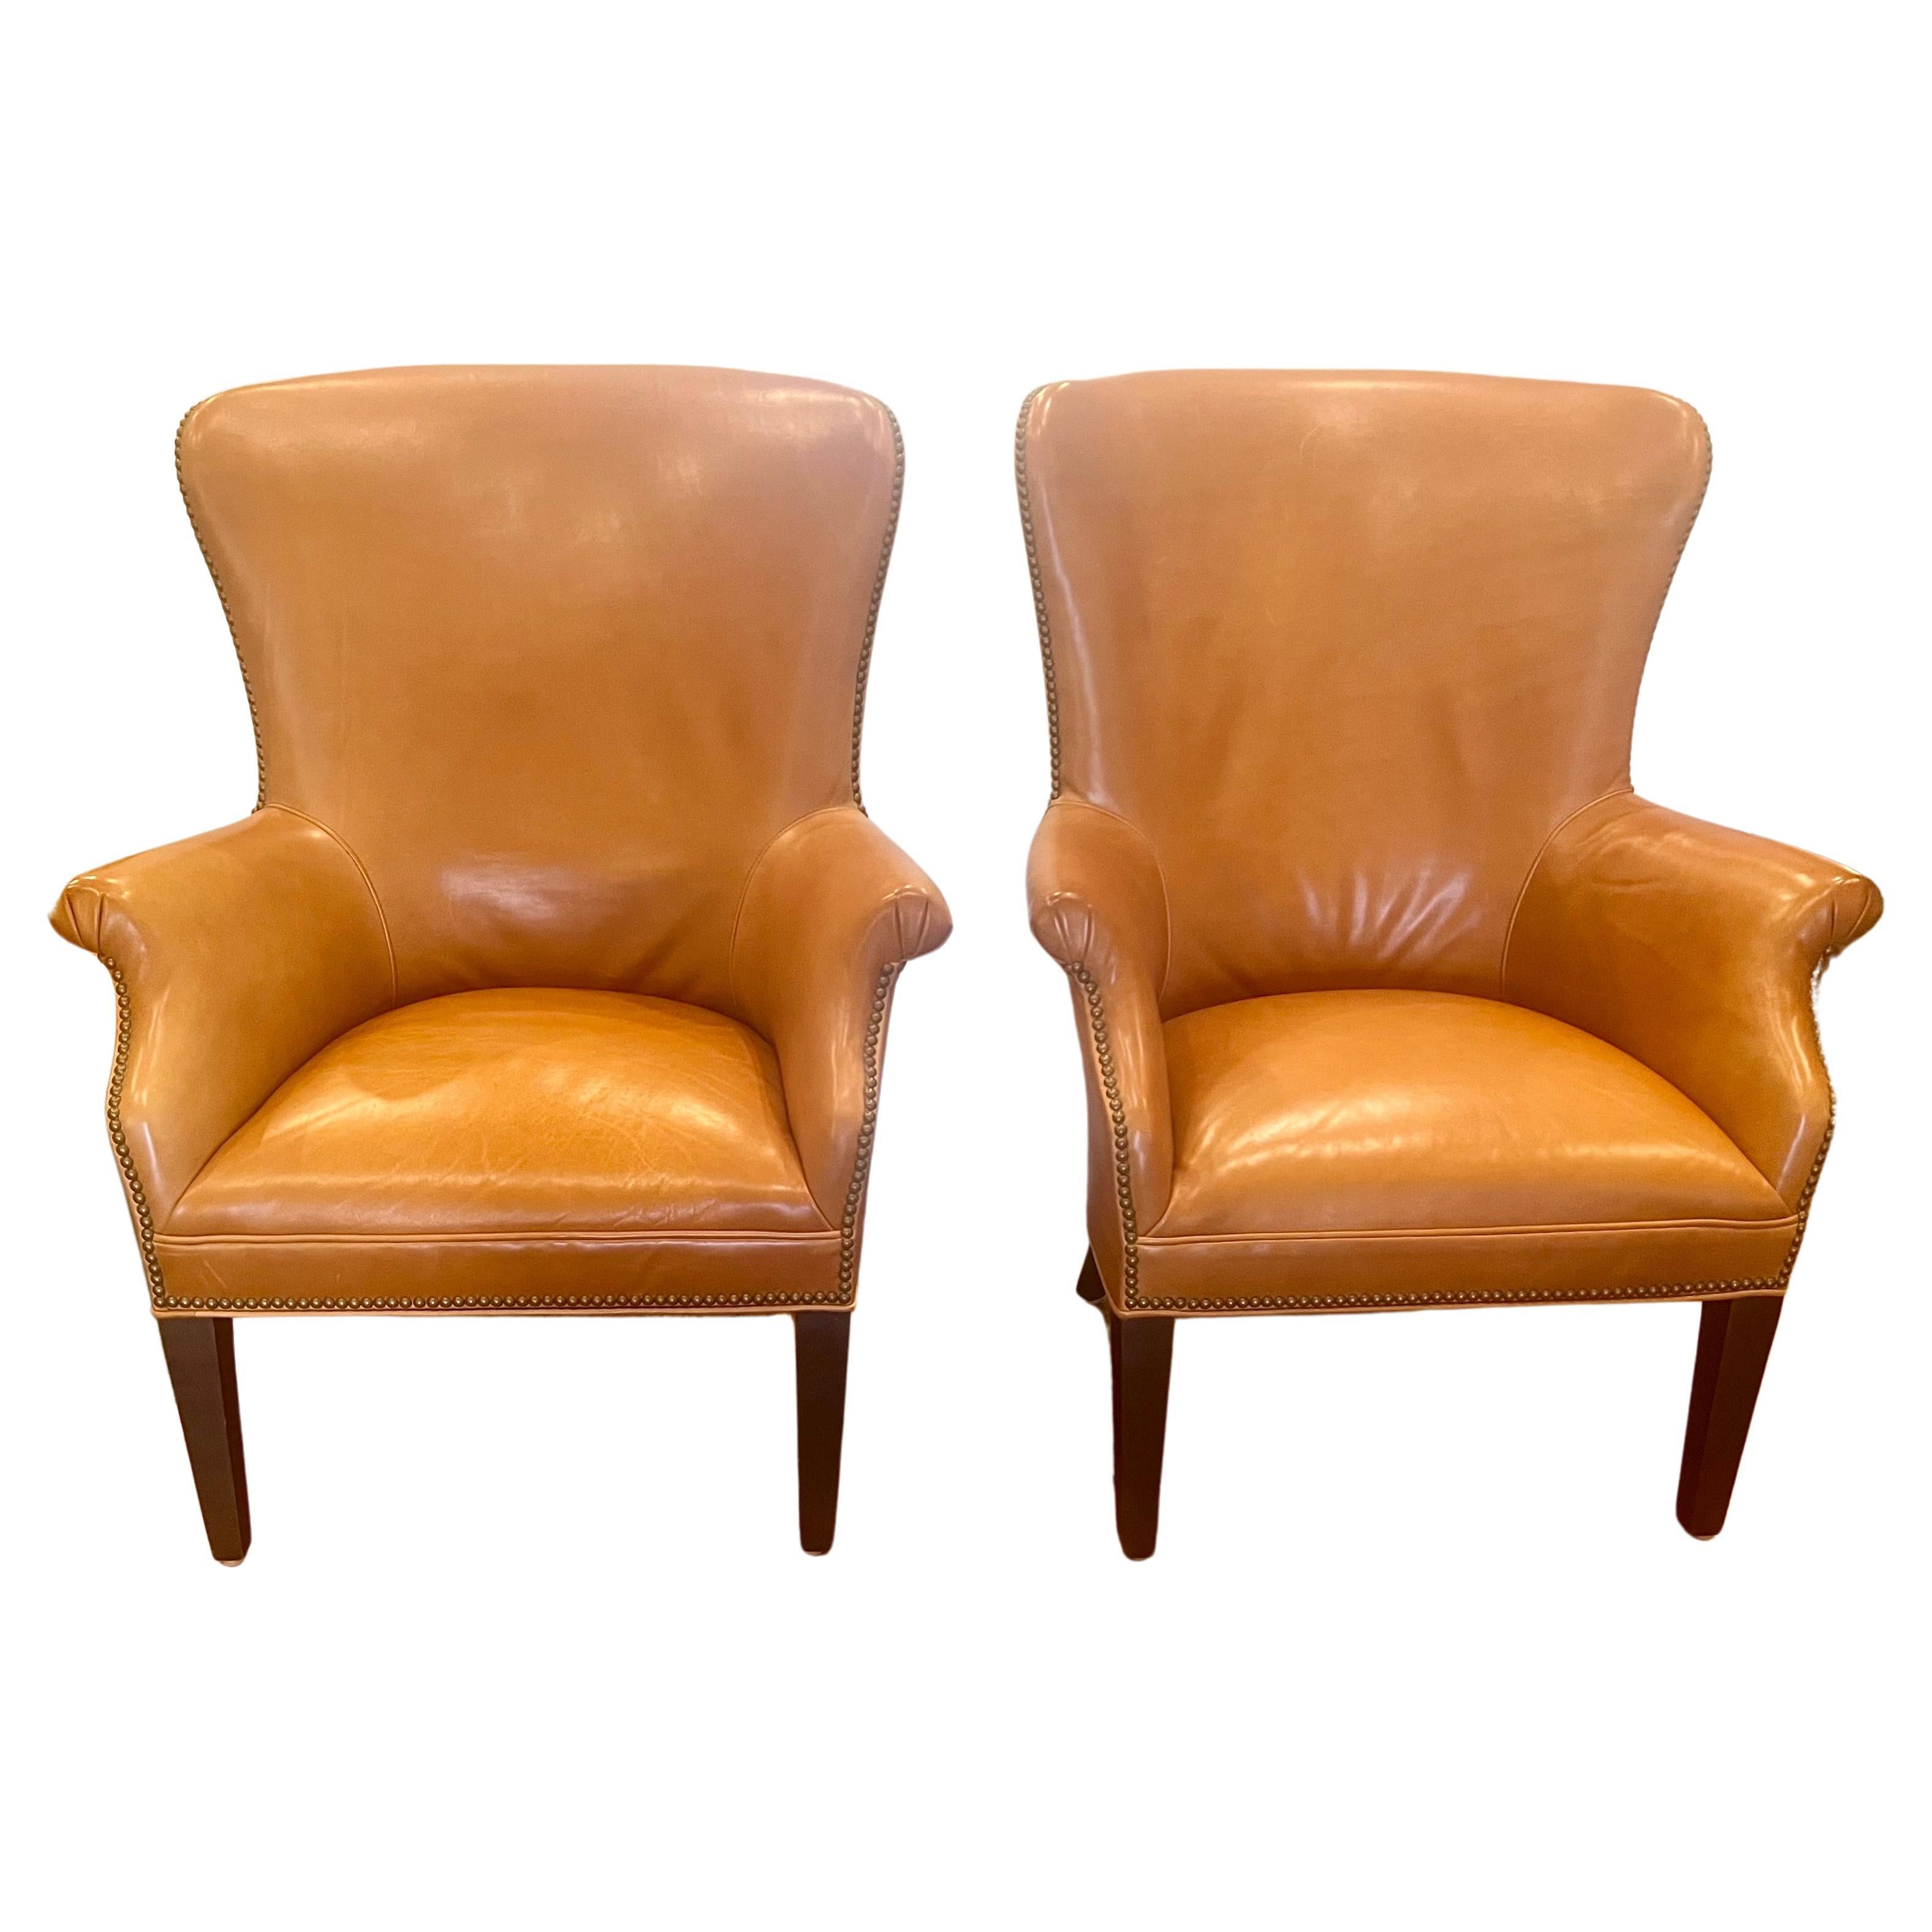 American Pair of Contemporary Caramel Leather Wingback Armchairs by Williams Sonoma